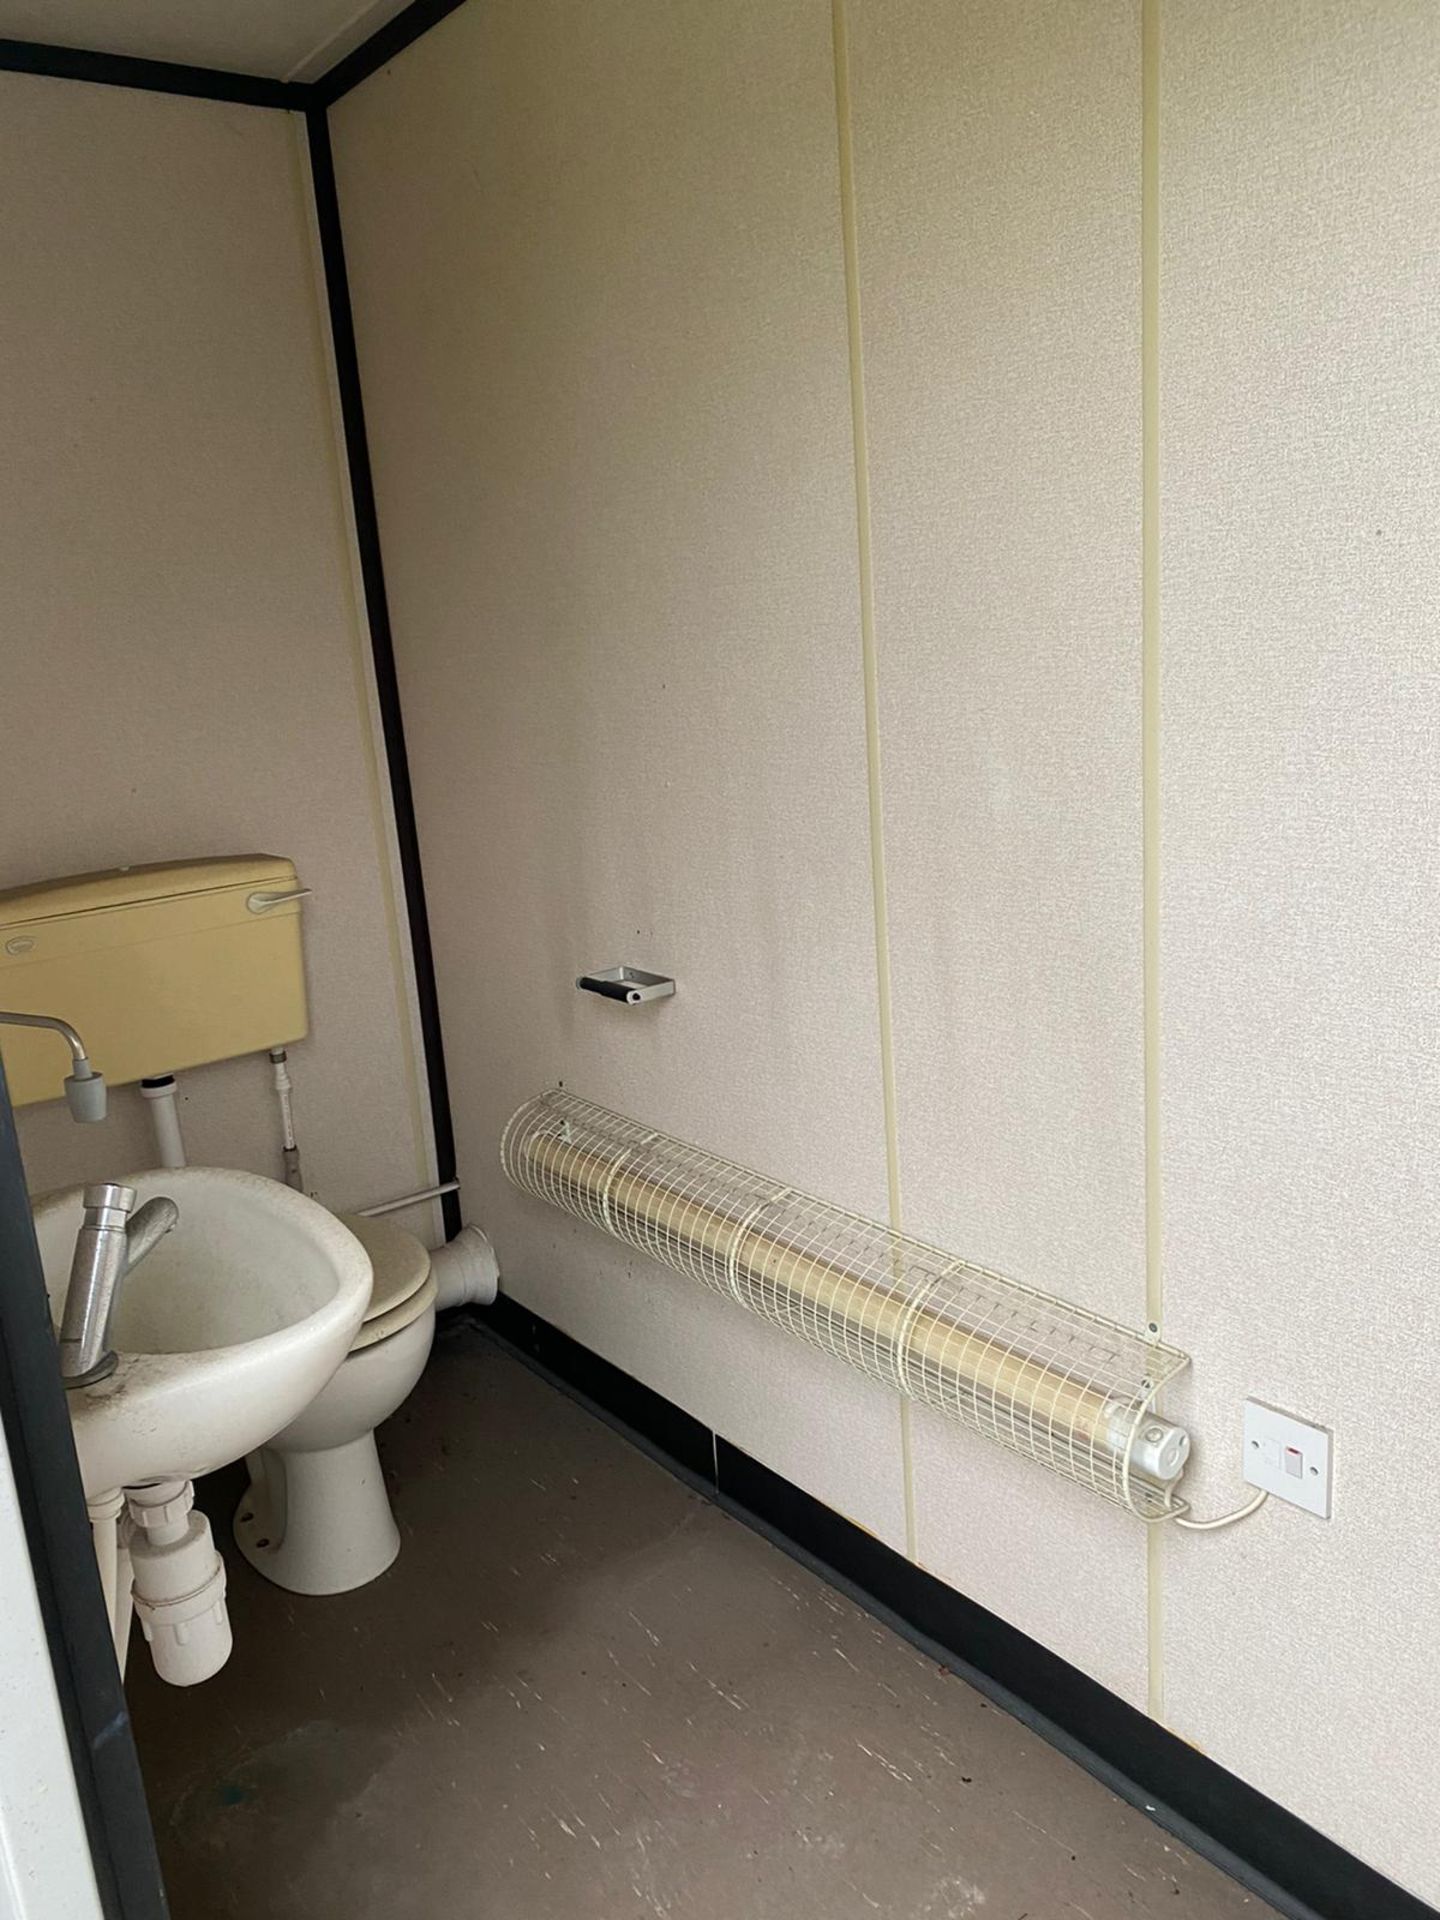 32ft 6 + 1 male and female toilet block - Image 7 of 17